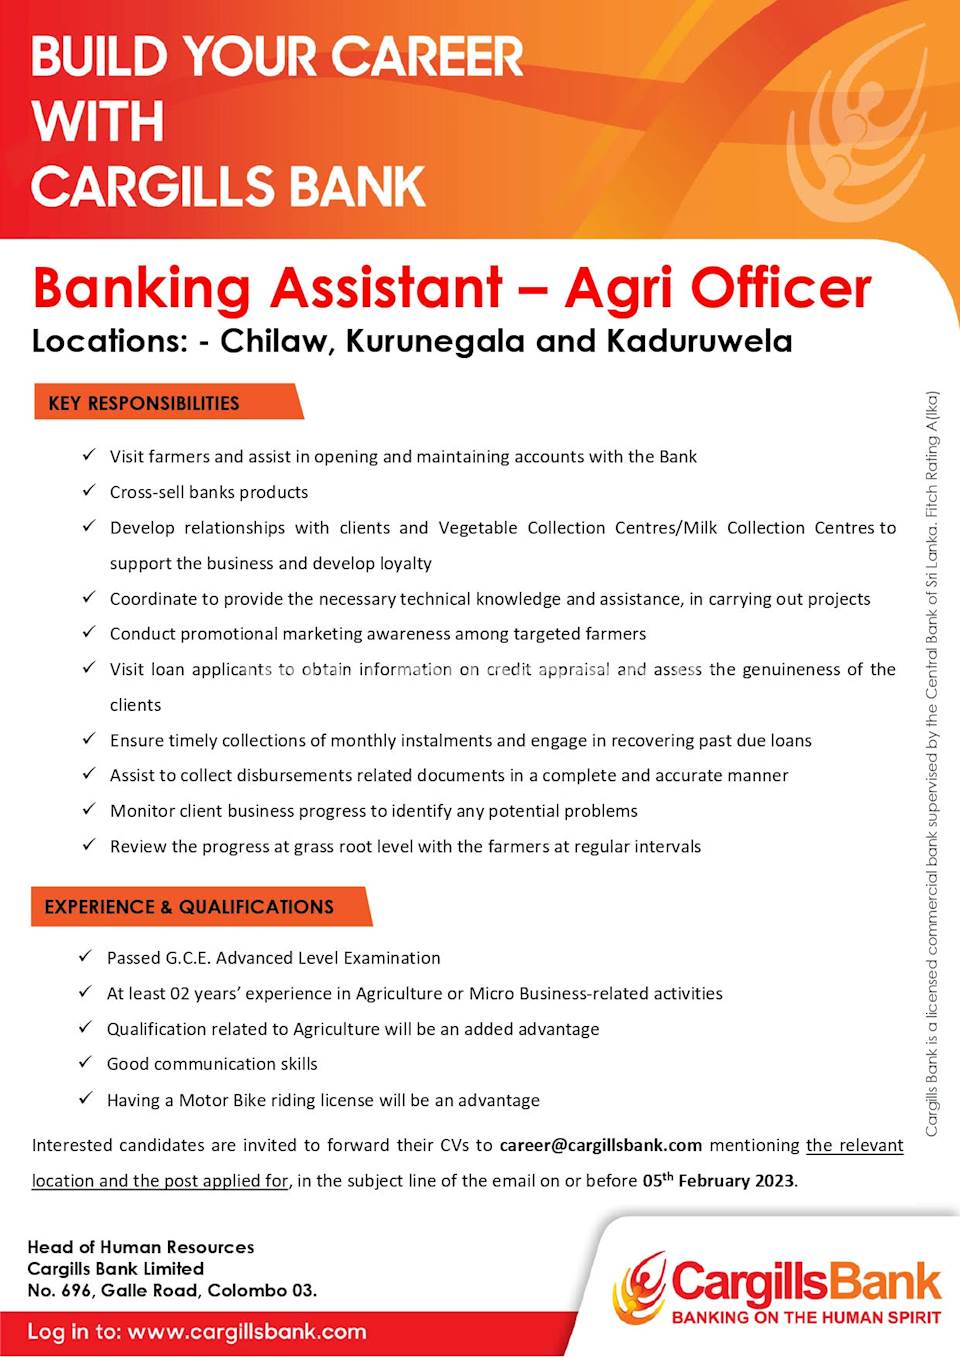 Banking Assistant - Agri Officer